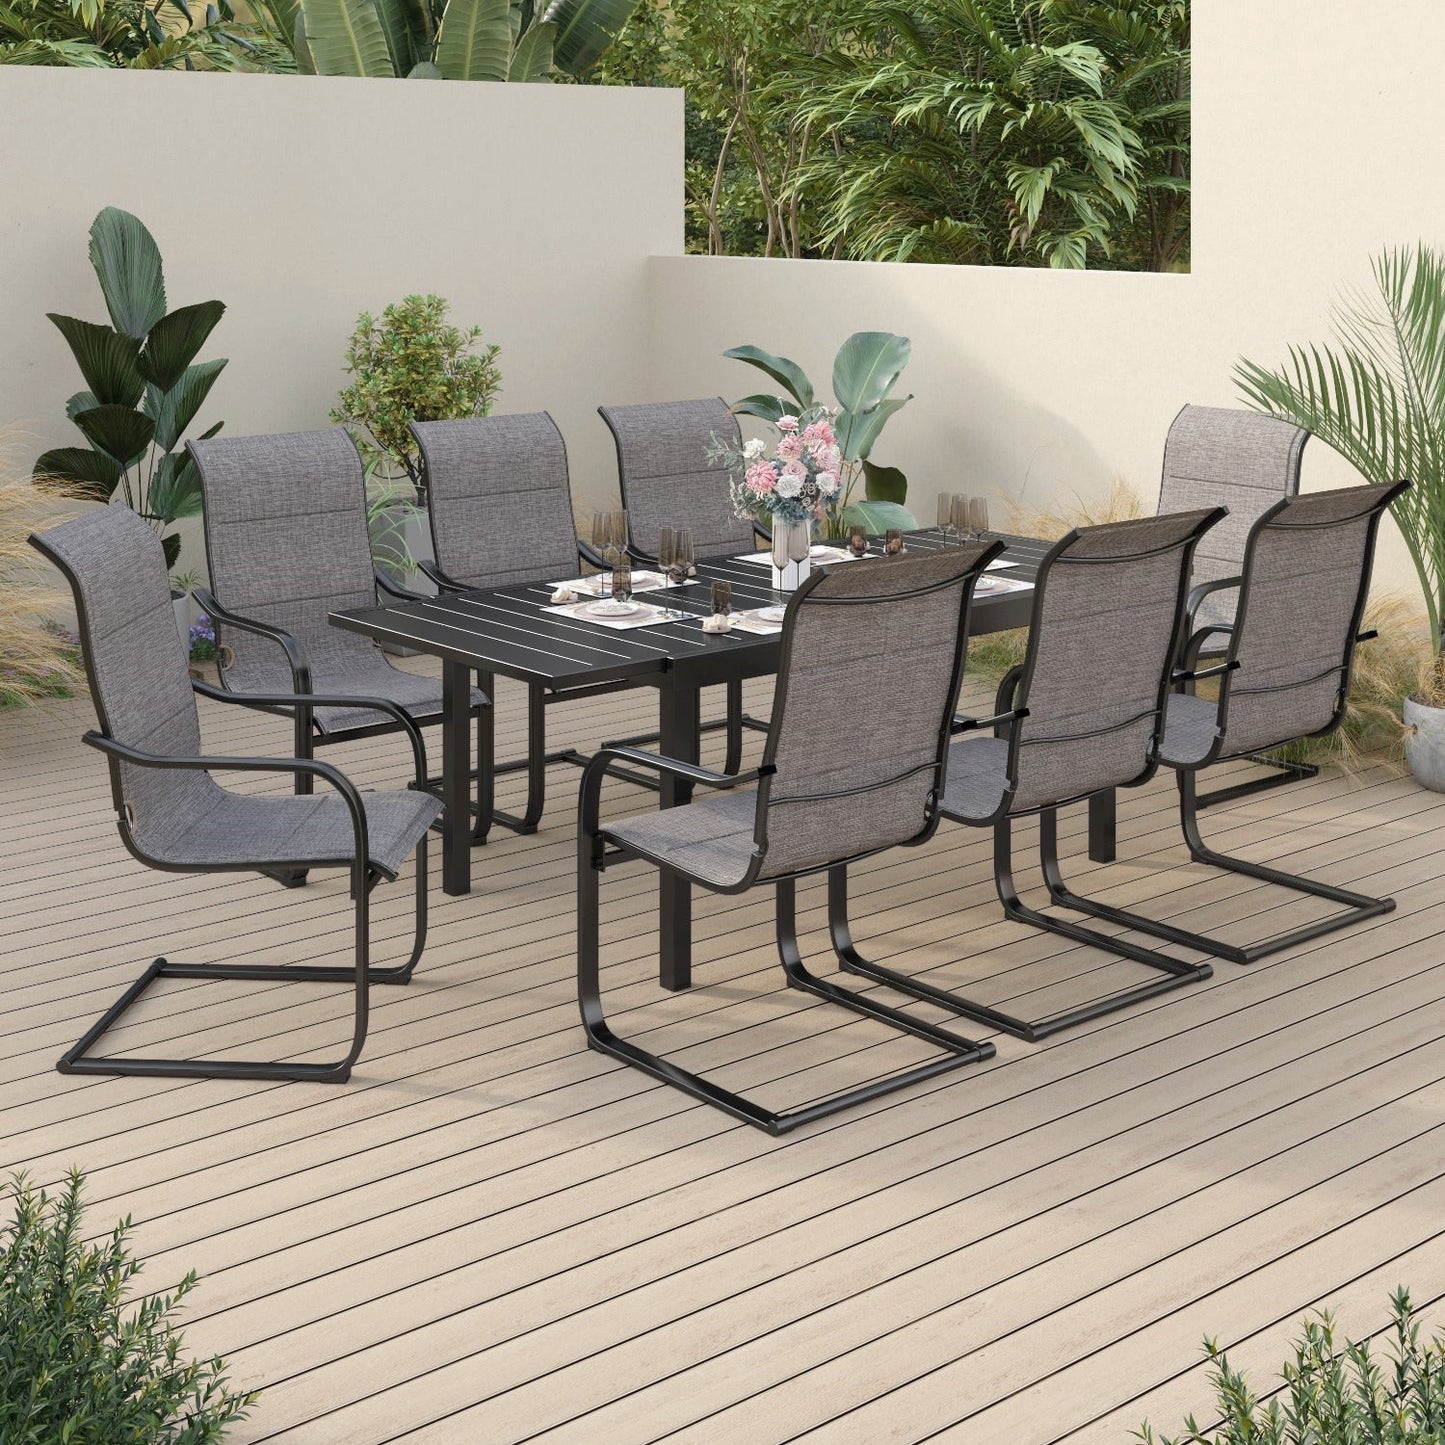 Sophia & William 9 Pieces Metal Patio Dining Set Paded Chairs and Extendable Table Set